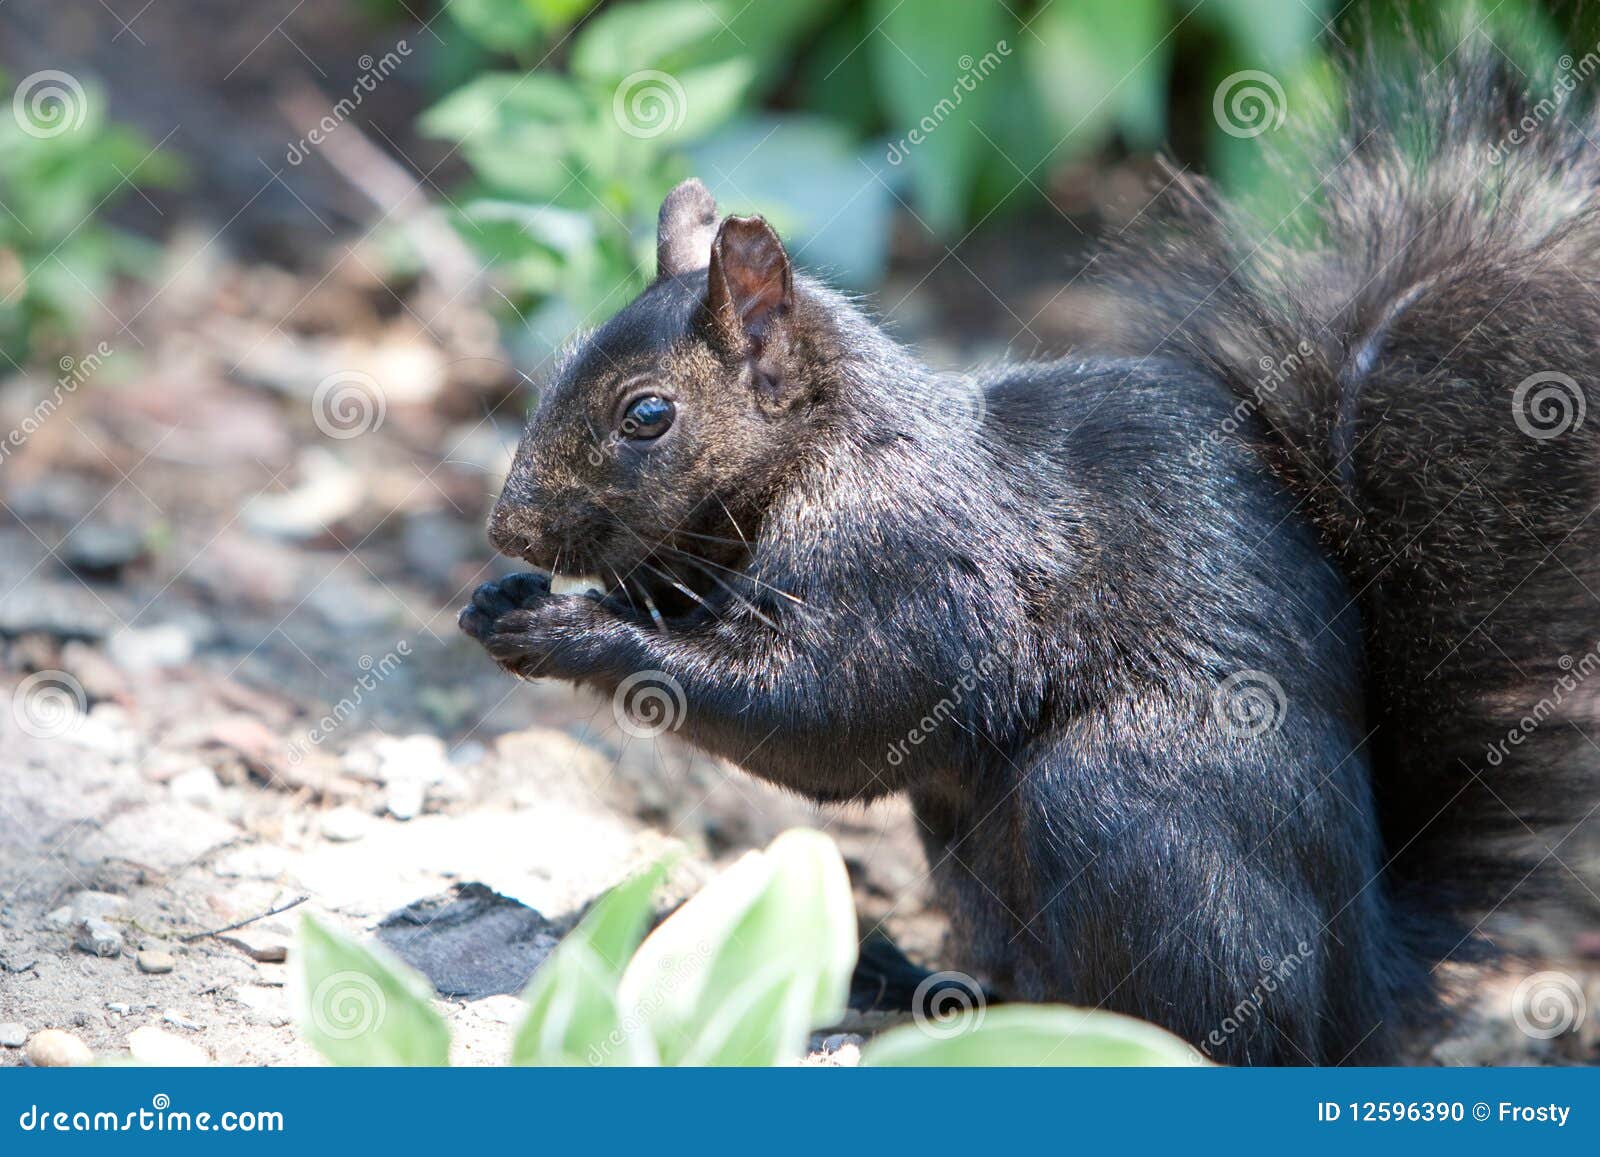 Adorable Black Squirrel Eating A Nut Stock Photo  Image: 12596390